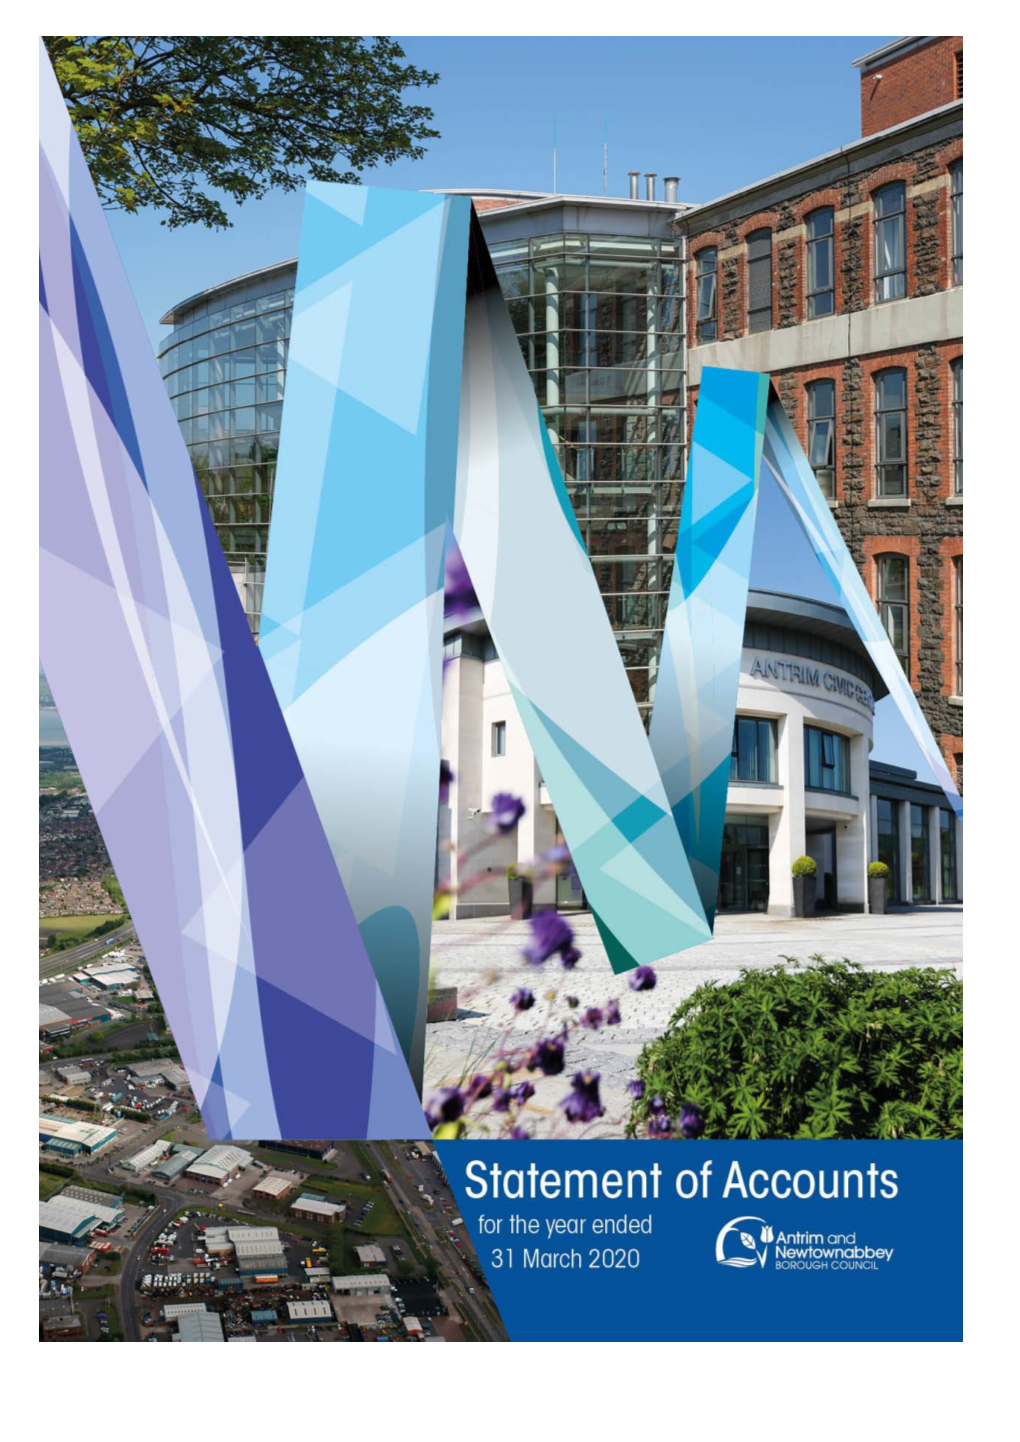 Statement of Accounts for the Year Ended 31March 2020